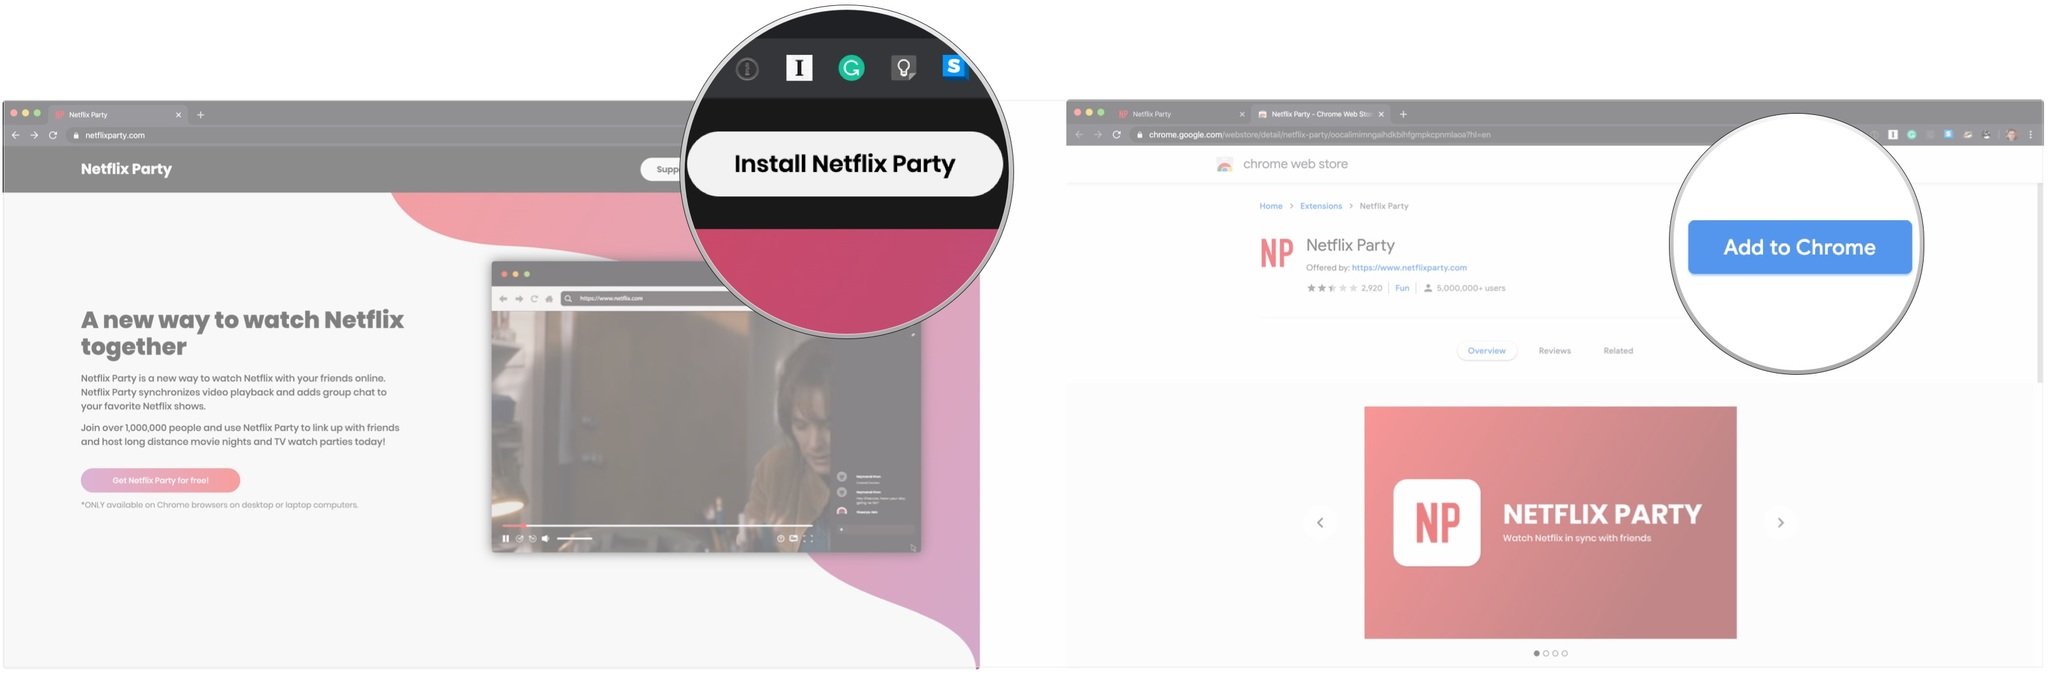 Click Install Netflix Party, click Add to Chrome